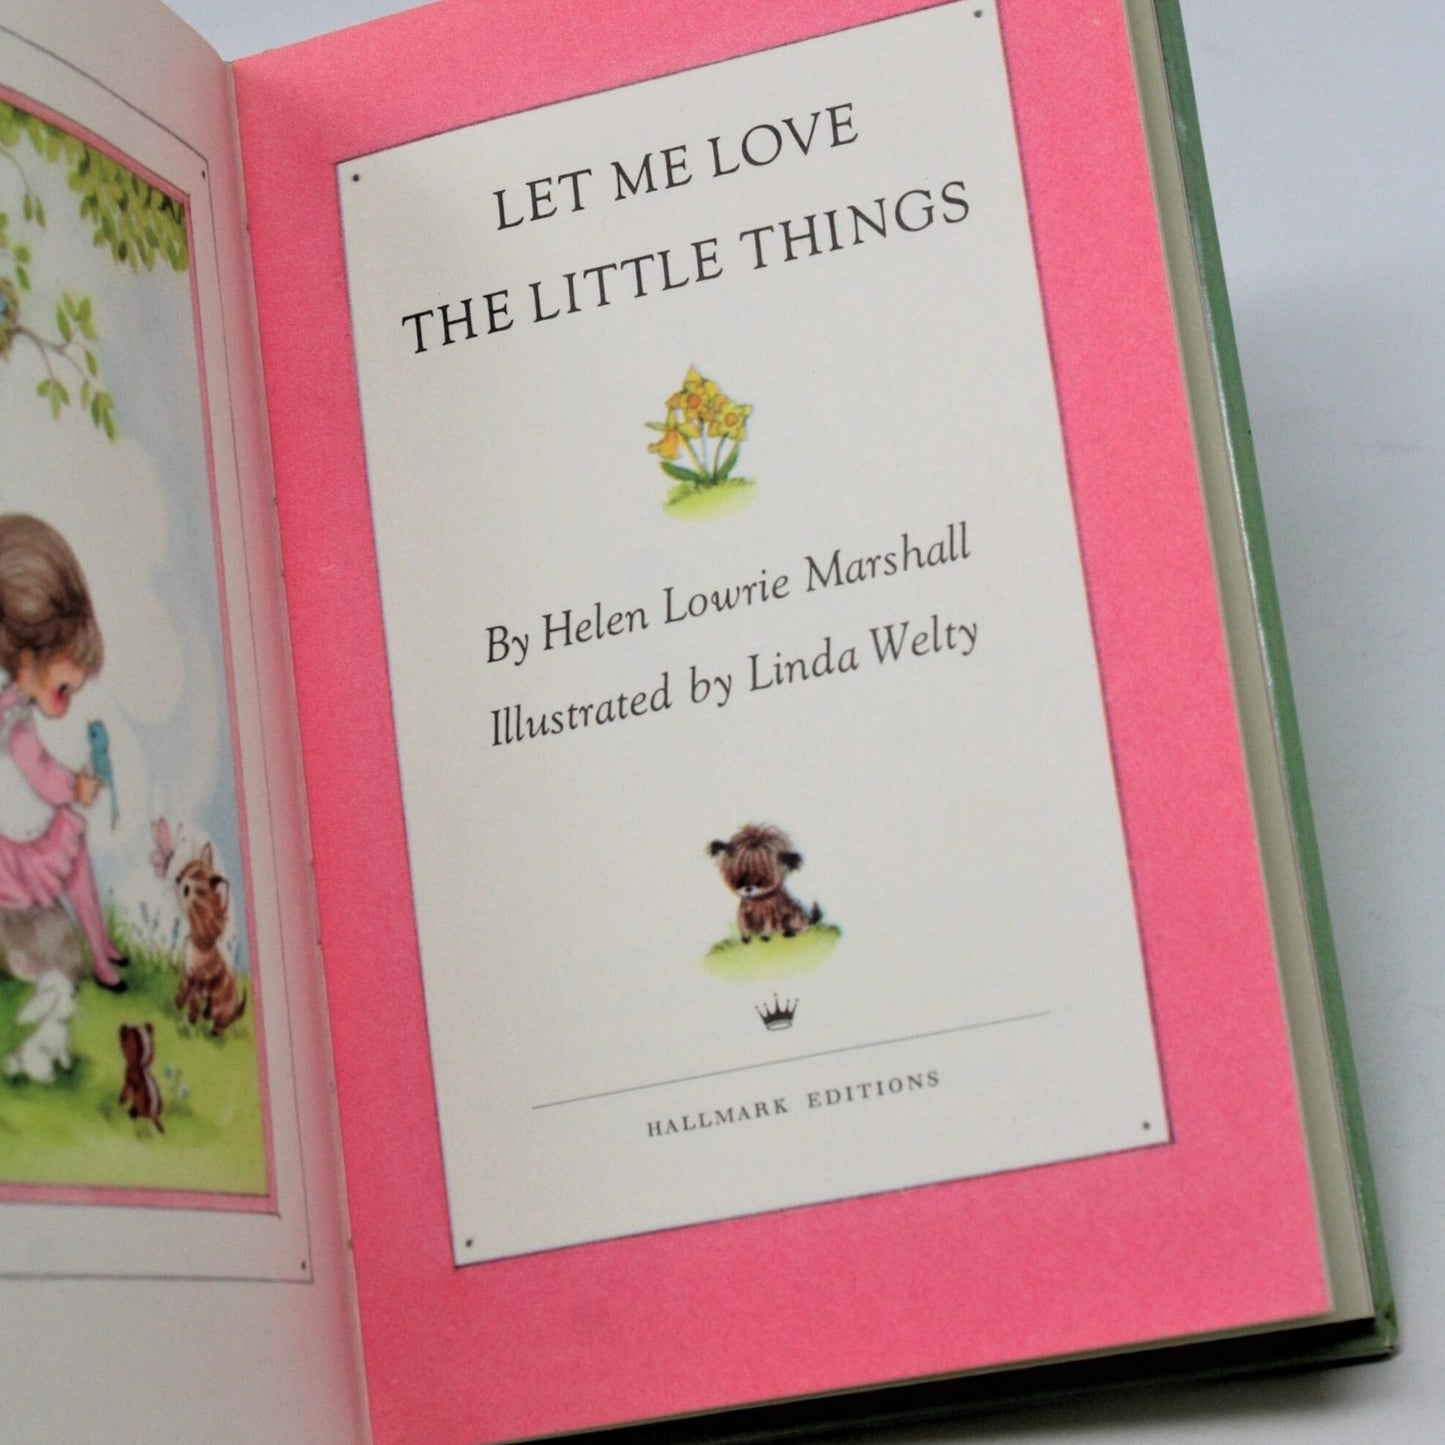 Book, Hallmark, Let Me Love the Little Things, Helen Lowrie Marshall, Vintage 1971